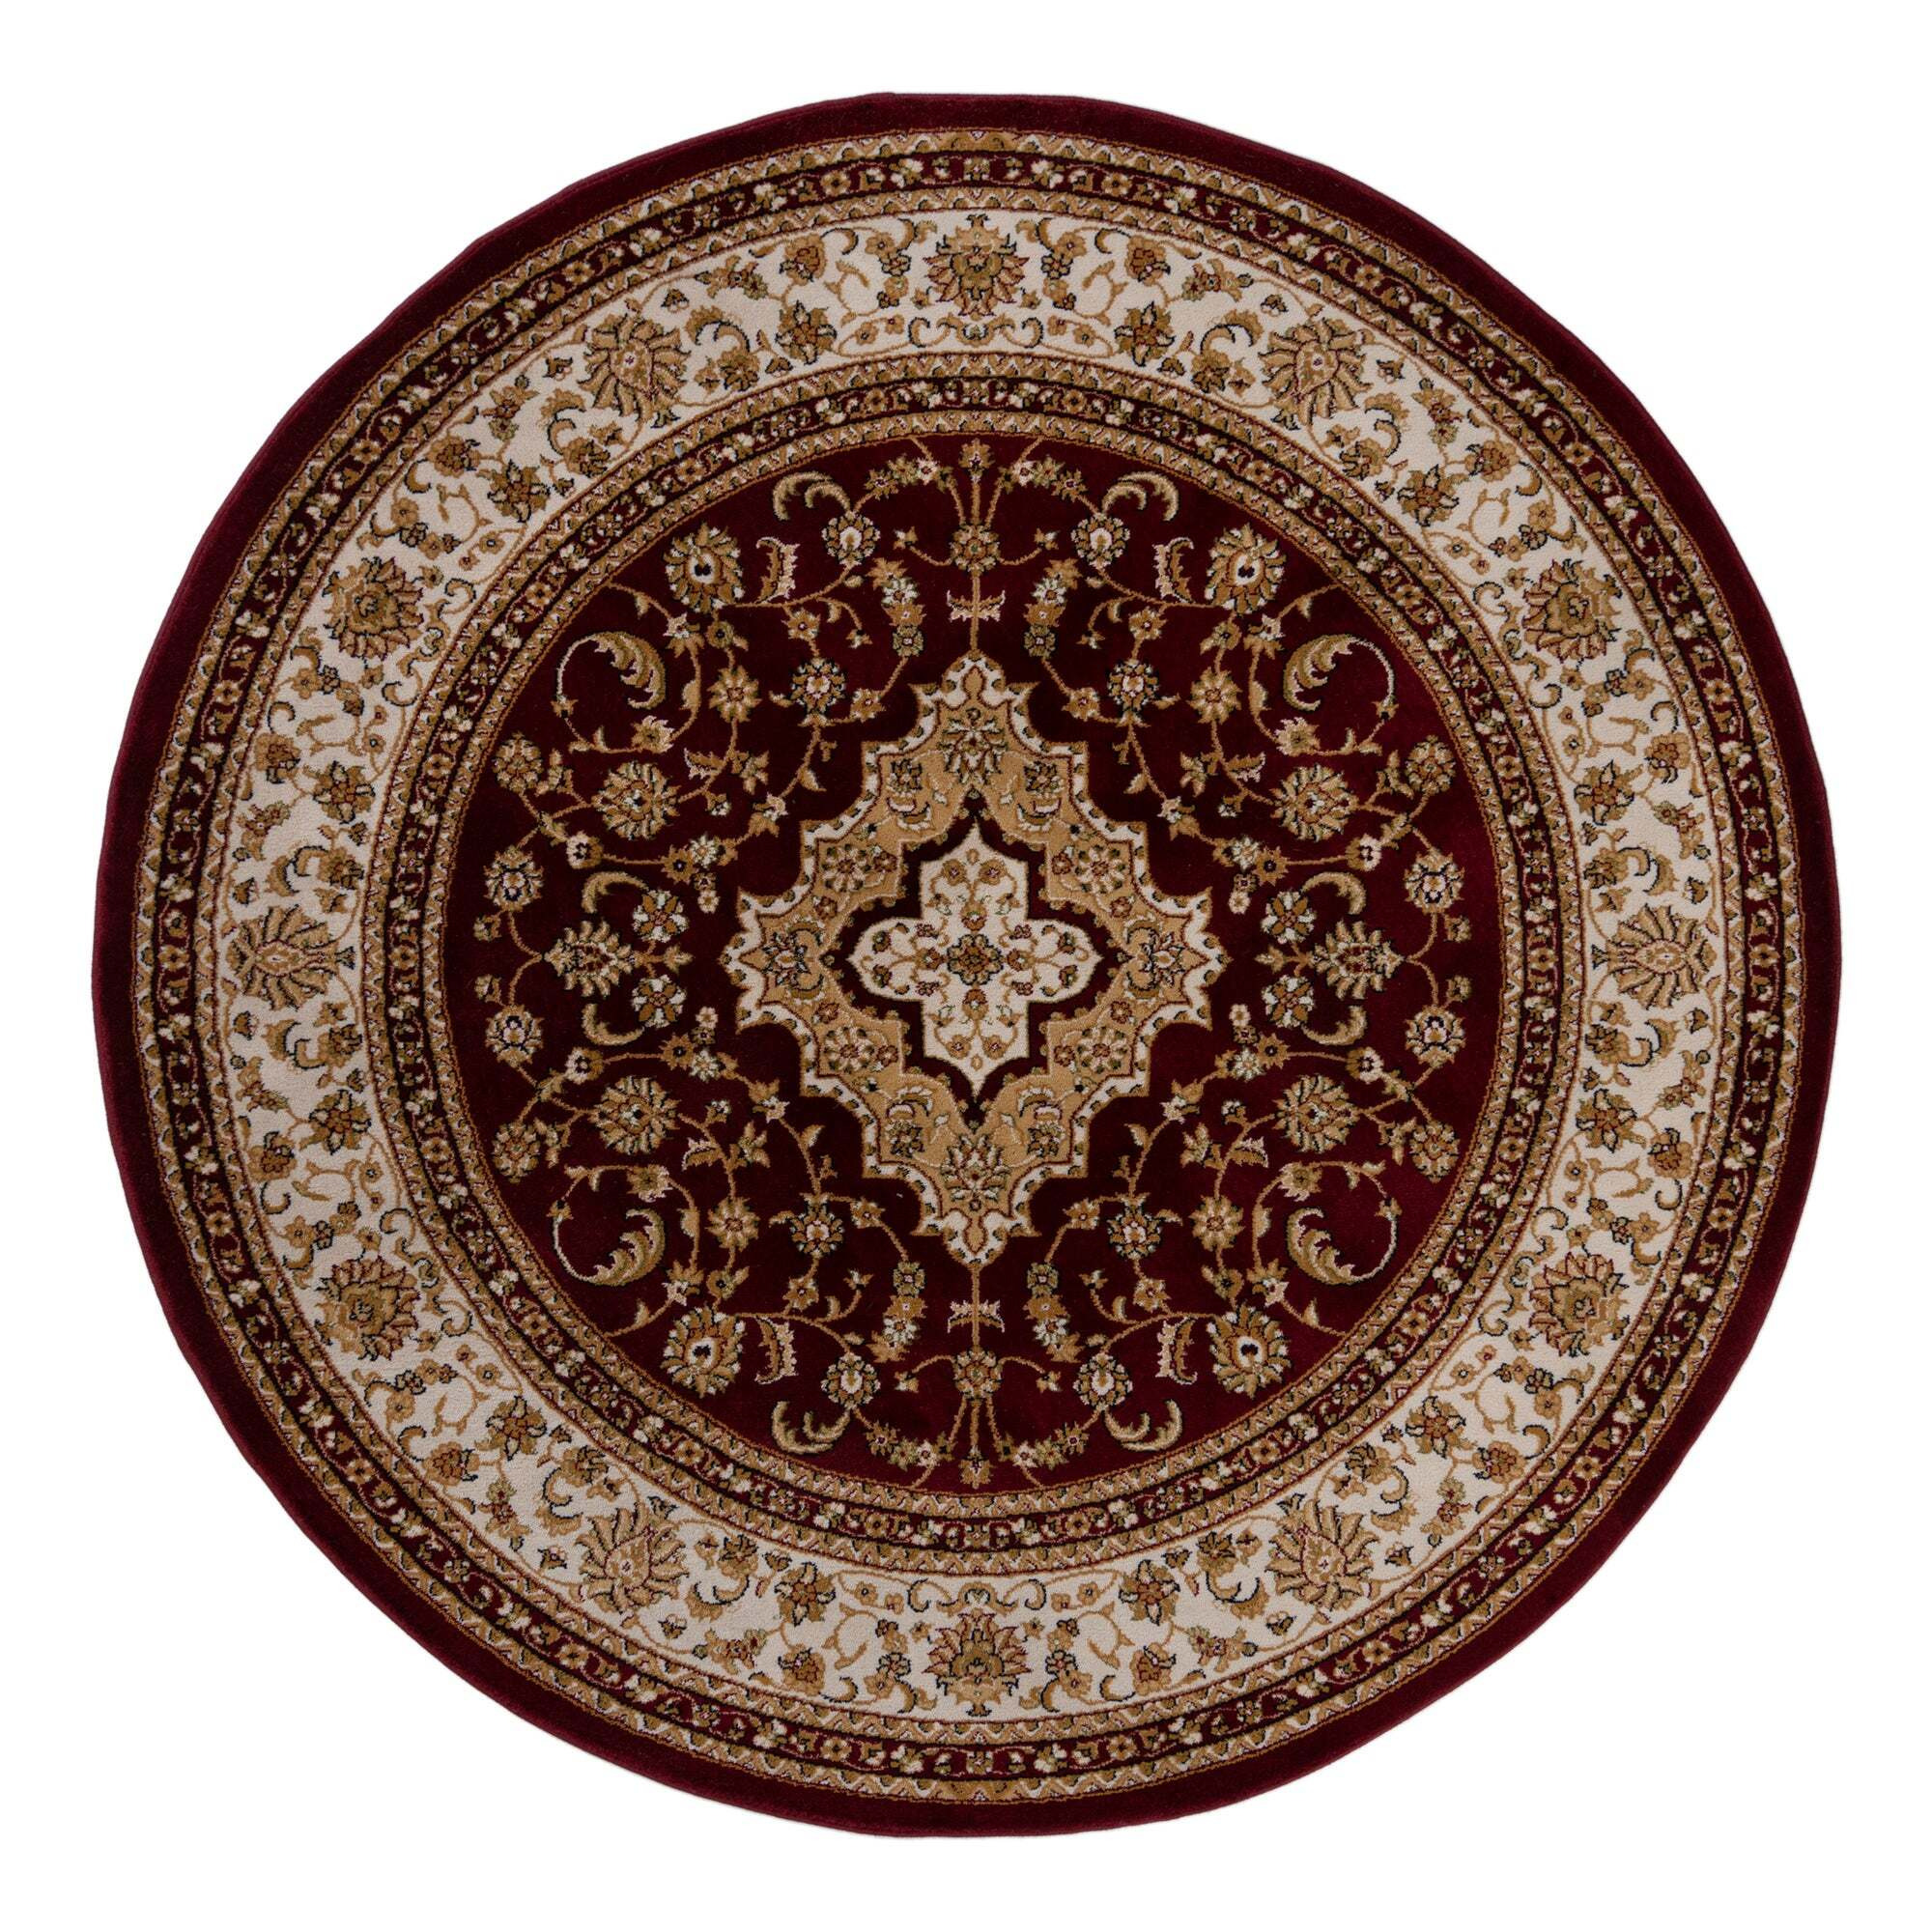 Antalya Traditional Round Rug Red, Beige and Brown